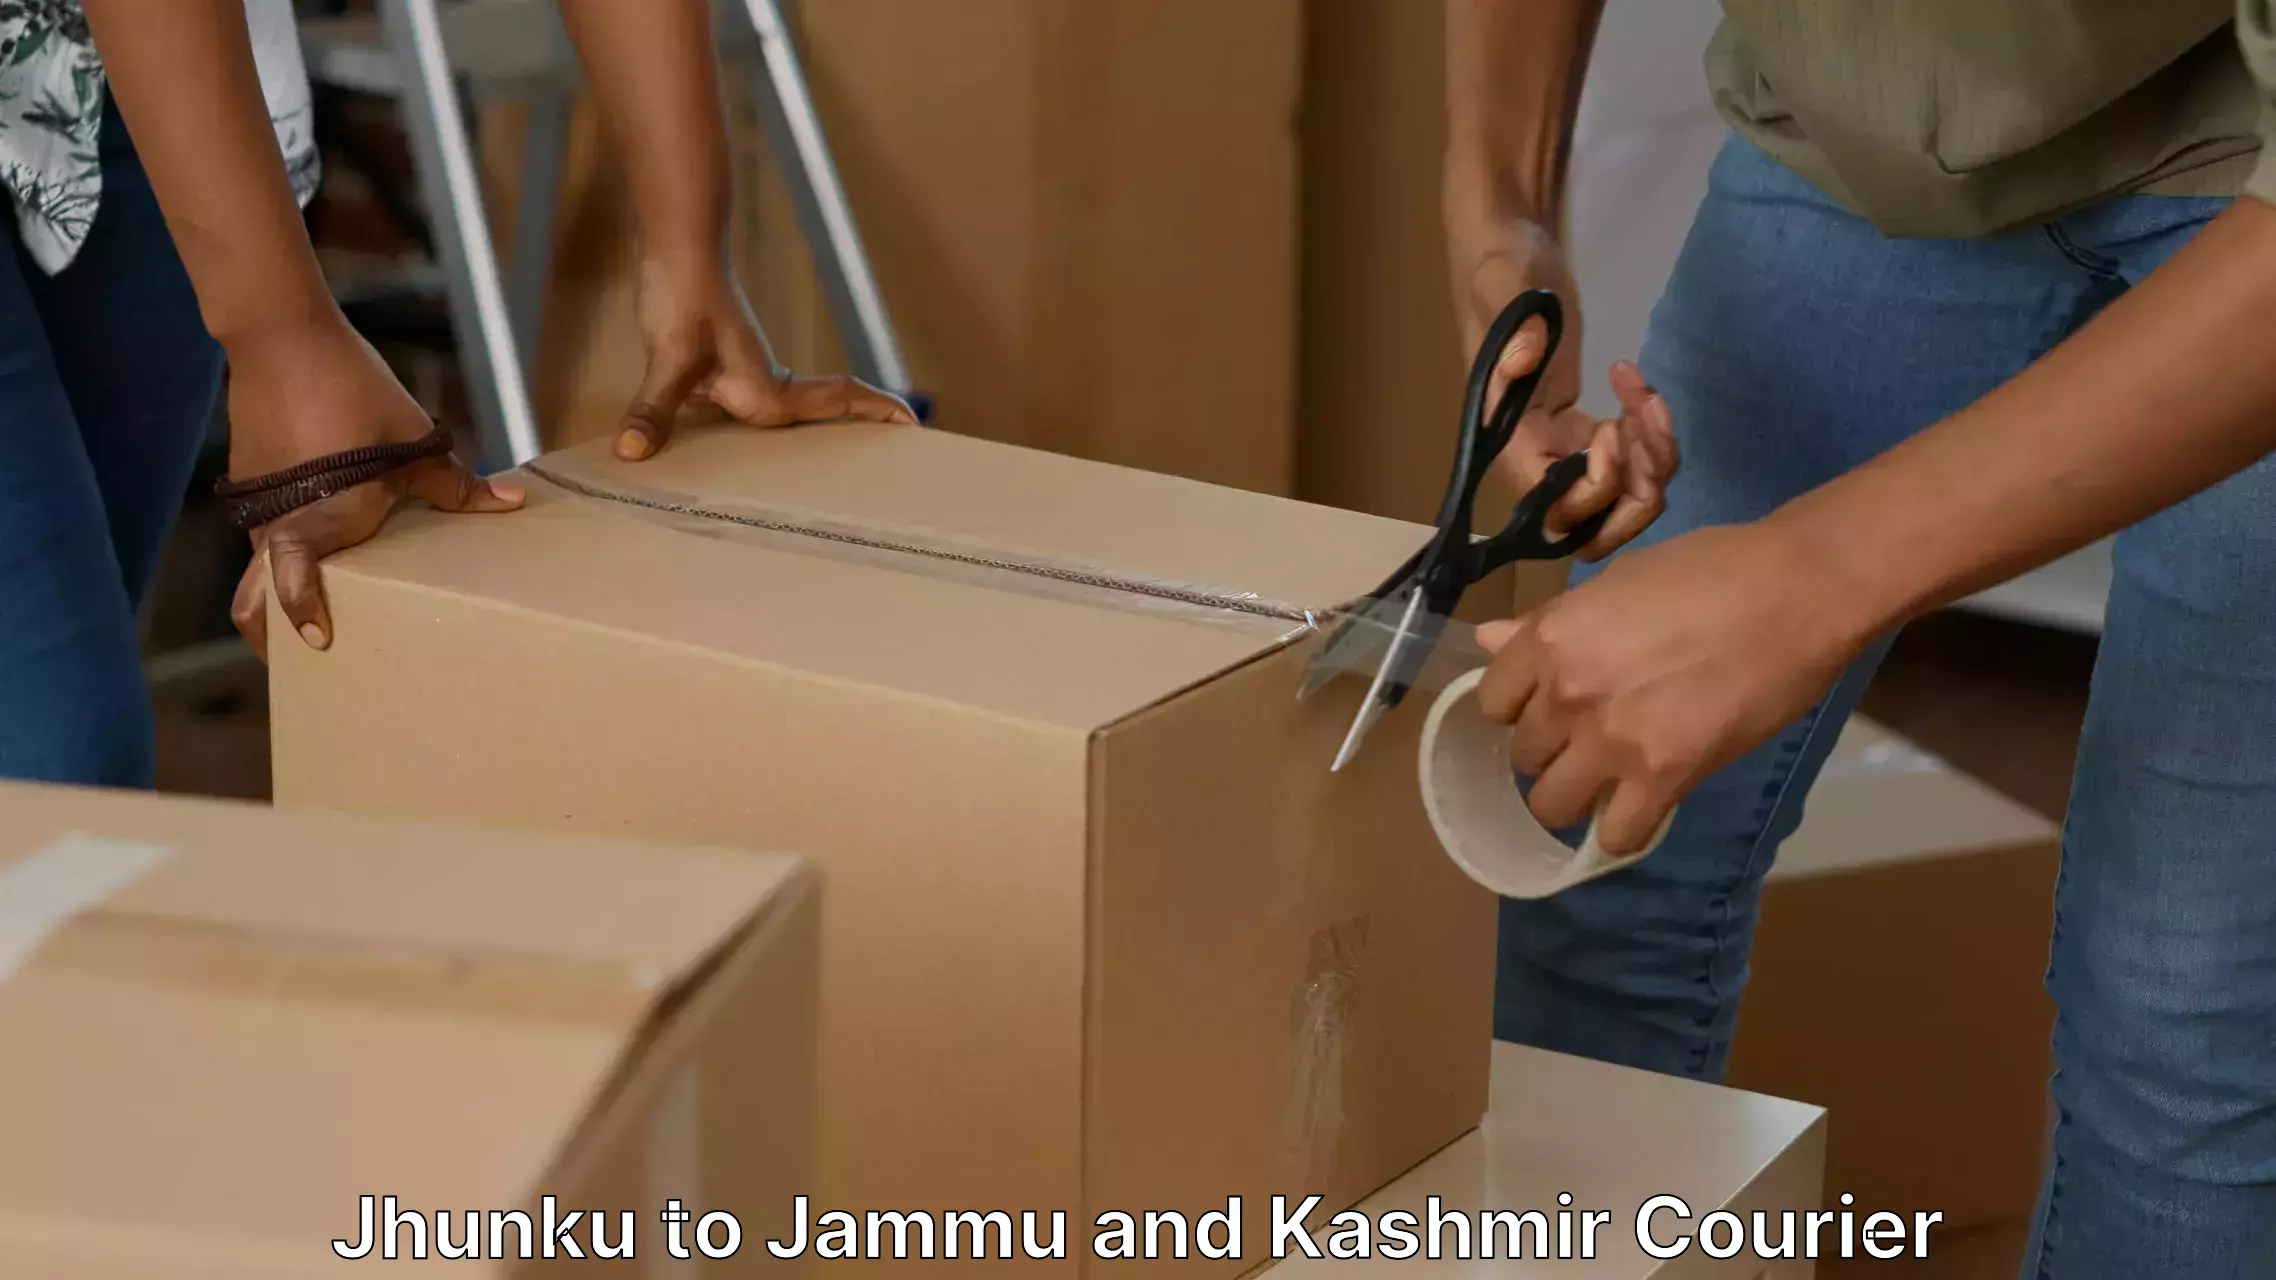 Trusted relocation experts Jhunku to Katra